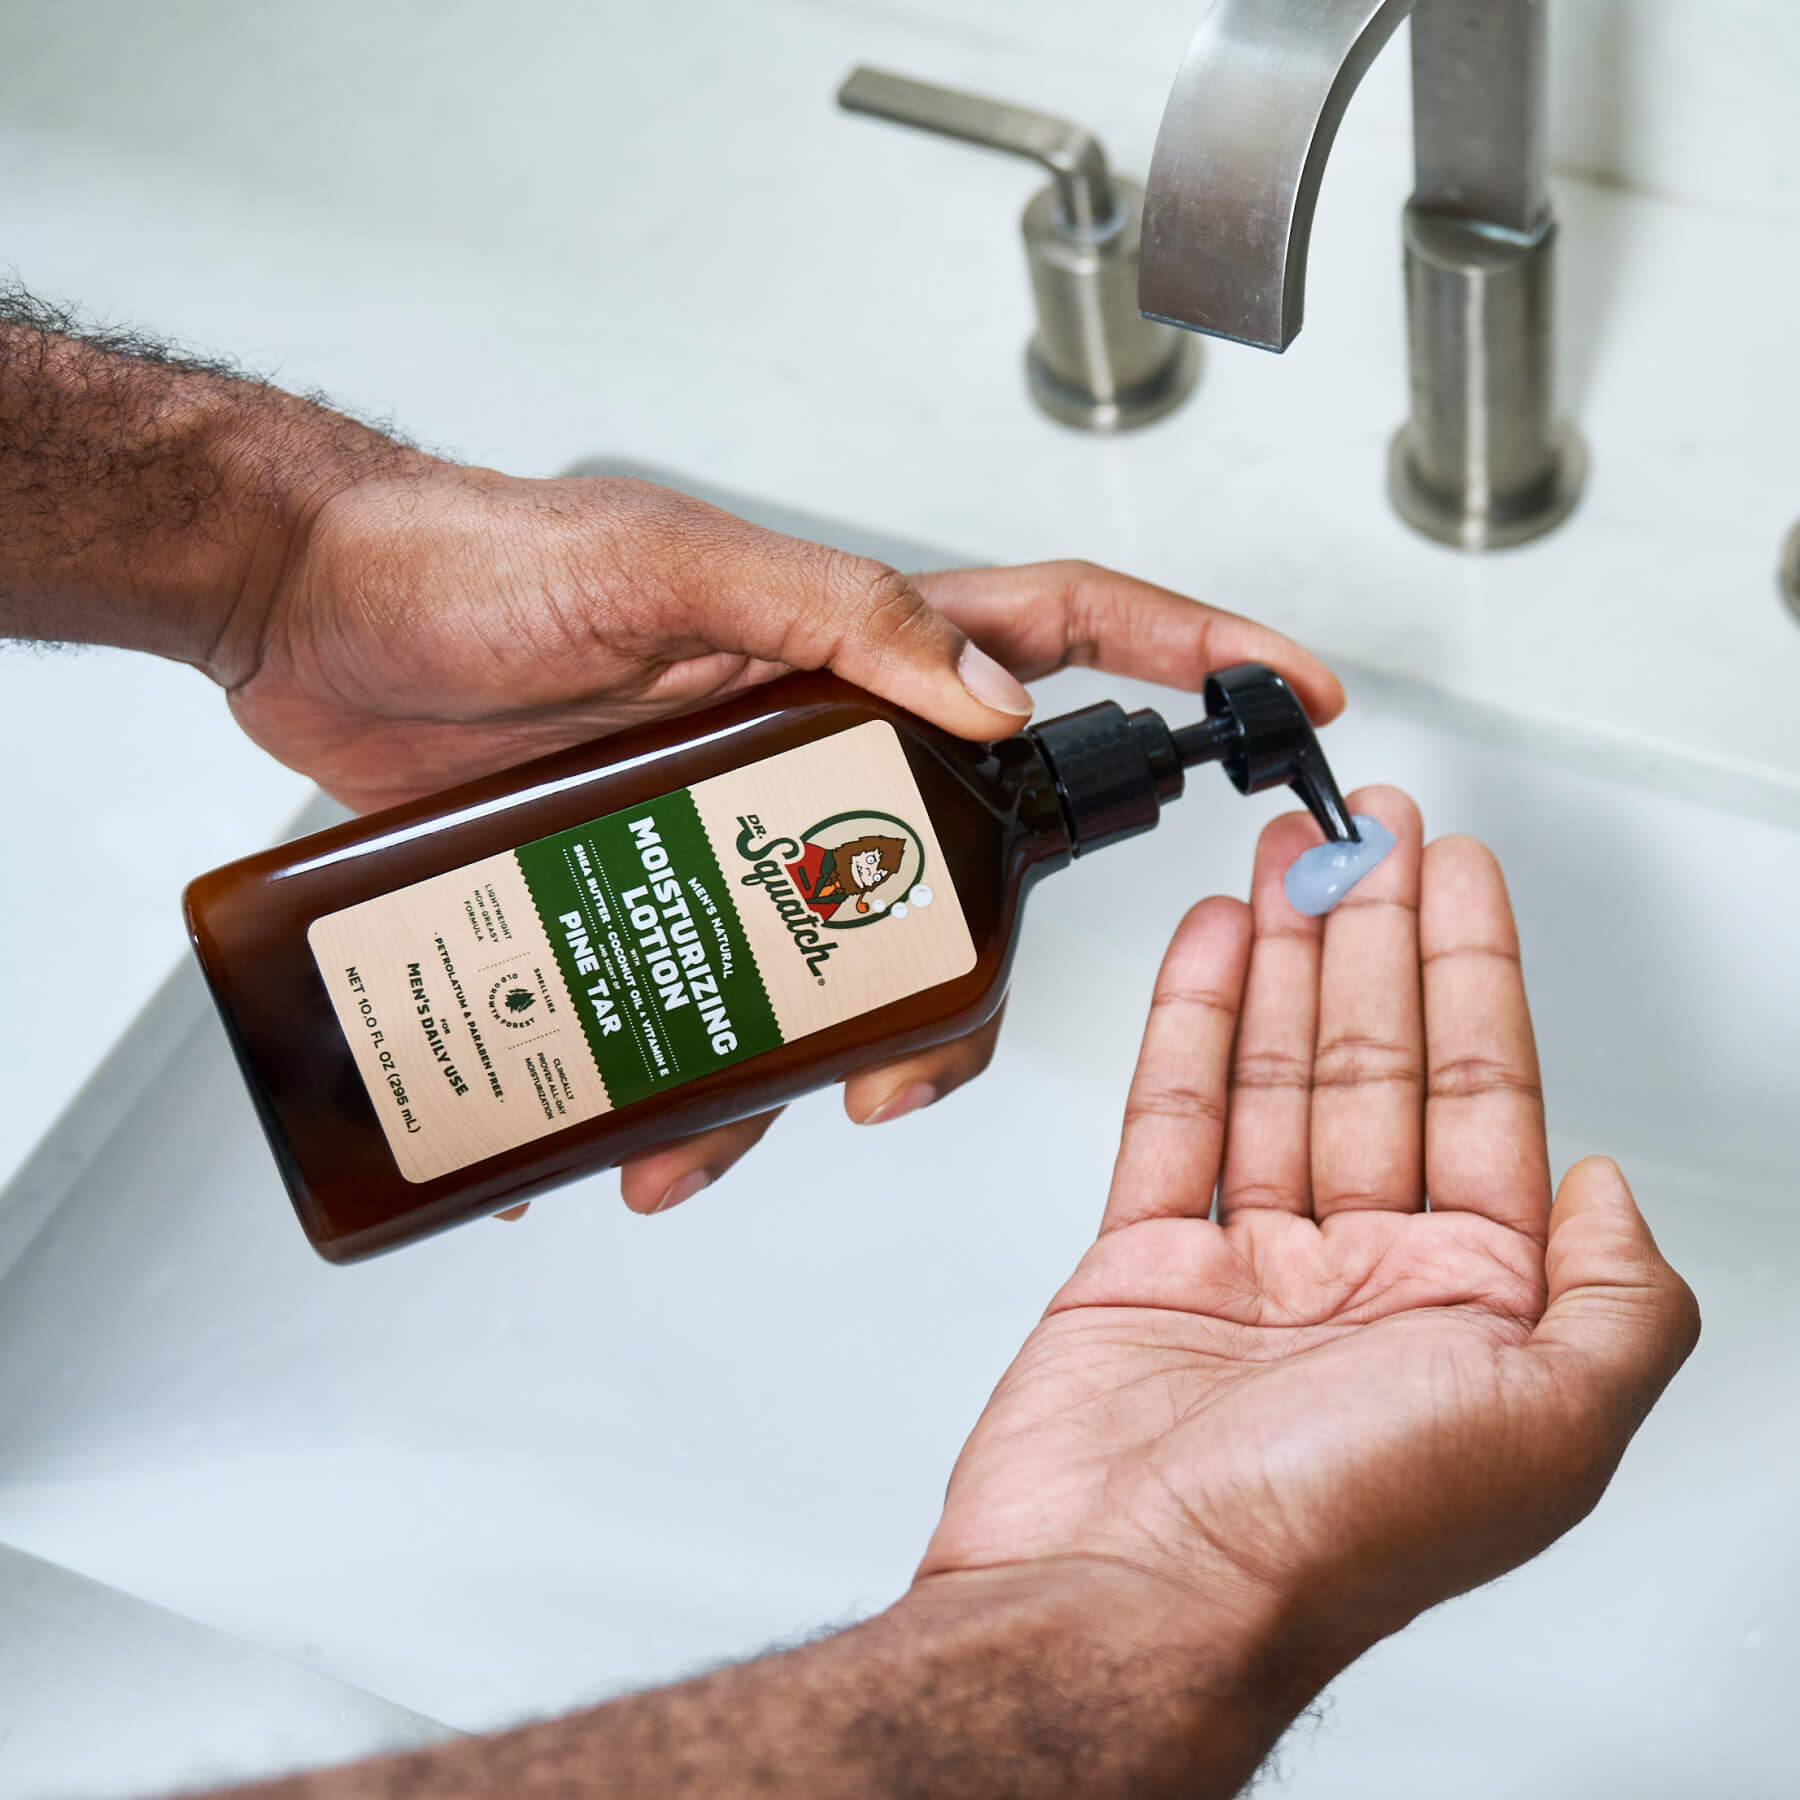 Dr. Squatch Men's Natural Lotion Non-Greasy Men's Lotion - 24-Hour Moisturization Hand and Body Lotion - Made with Shea Butter, Coconut Oil, and